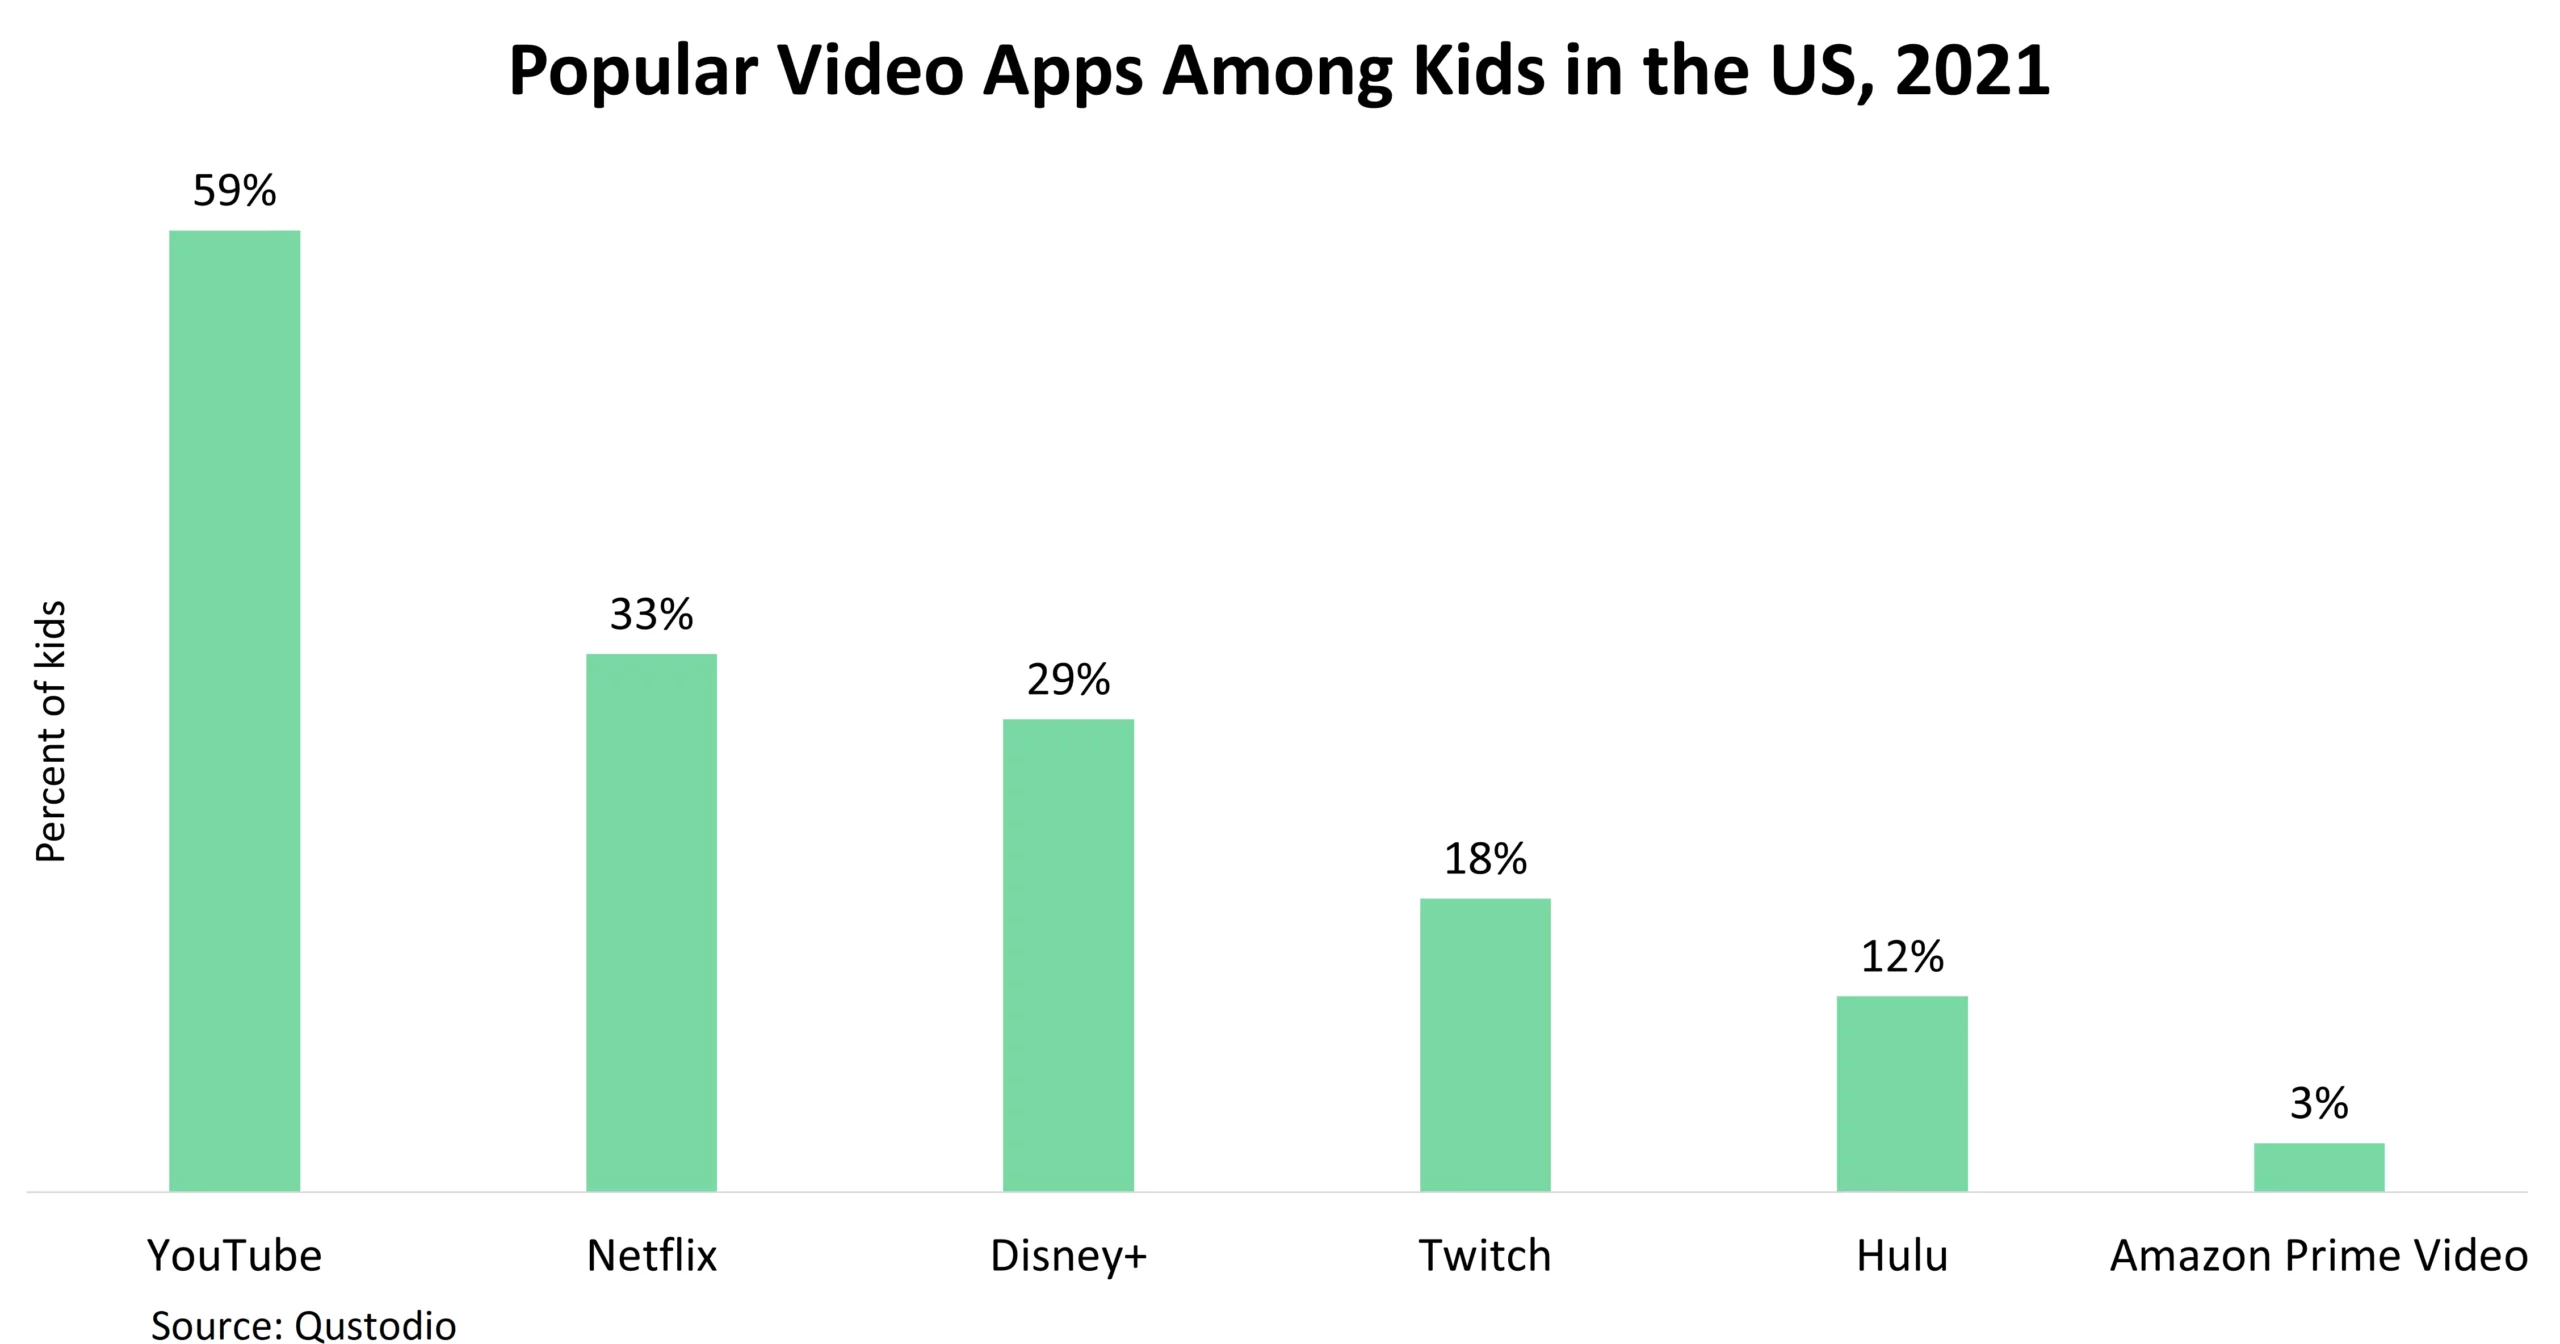 Popular Video Apps Among Kids in the US in 2021